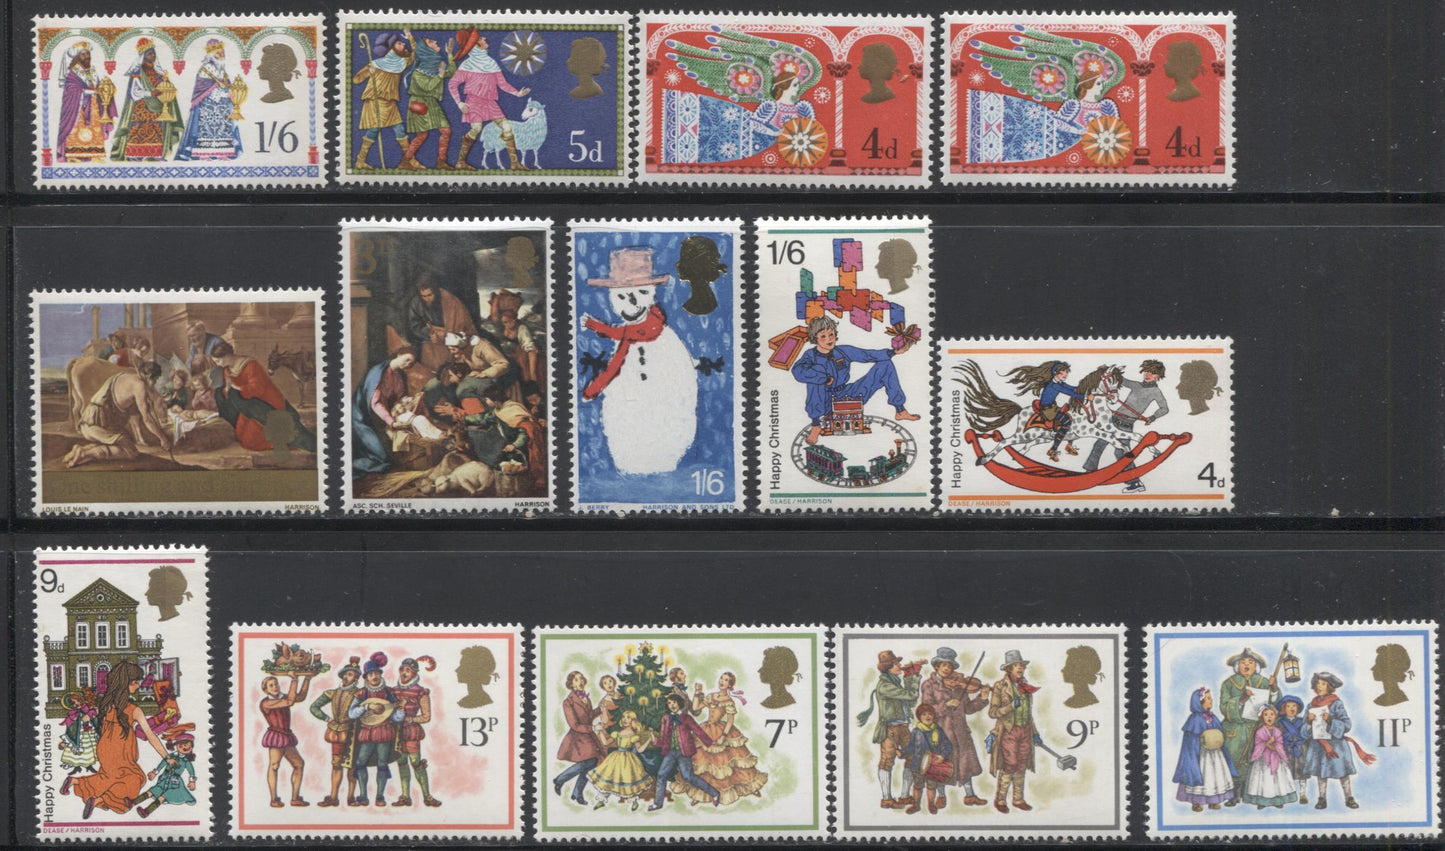 Lot 251 Great Britain 1966 to 1978 Christmas Issues, A Small Selection of 5 Mostly Complete VFNH Sets